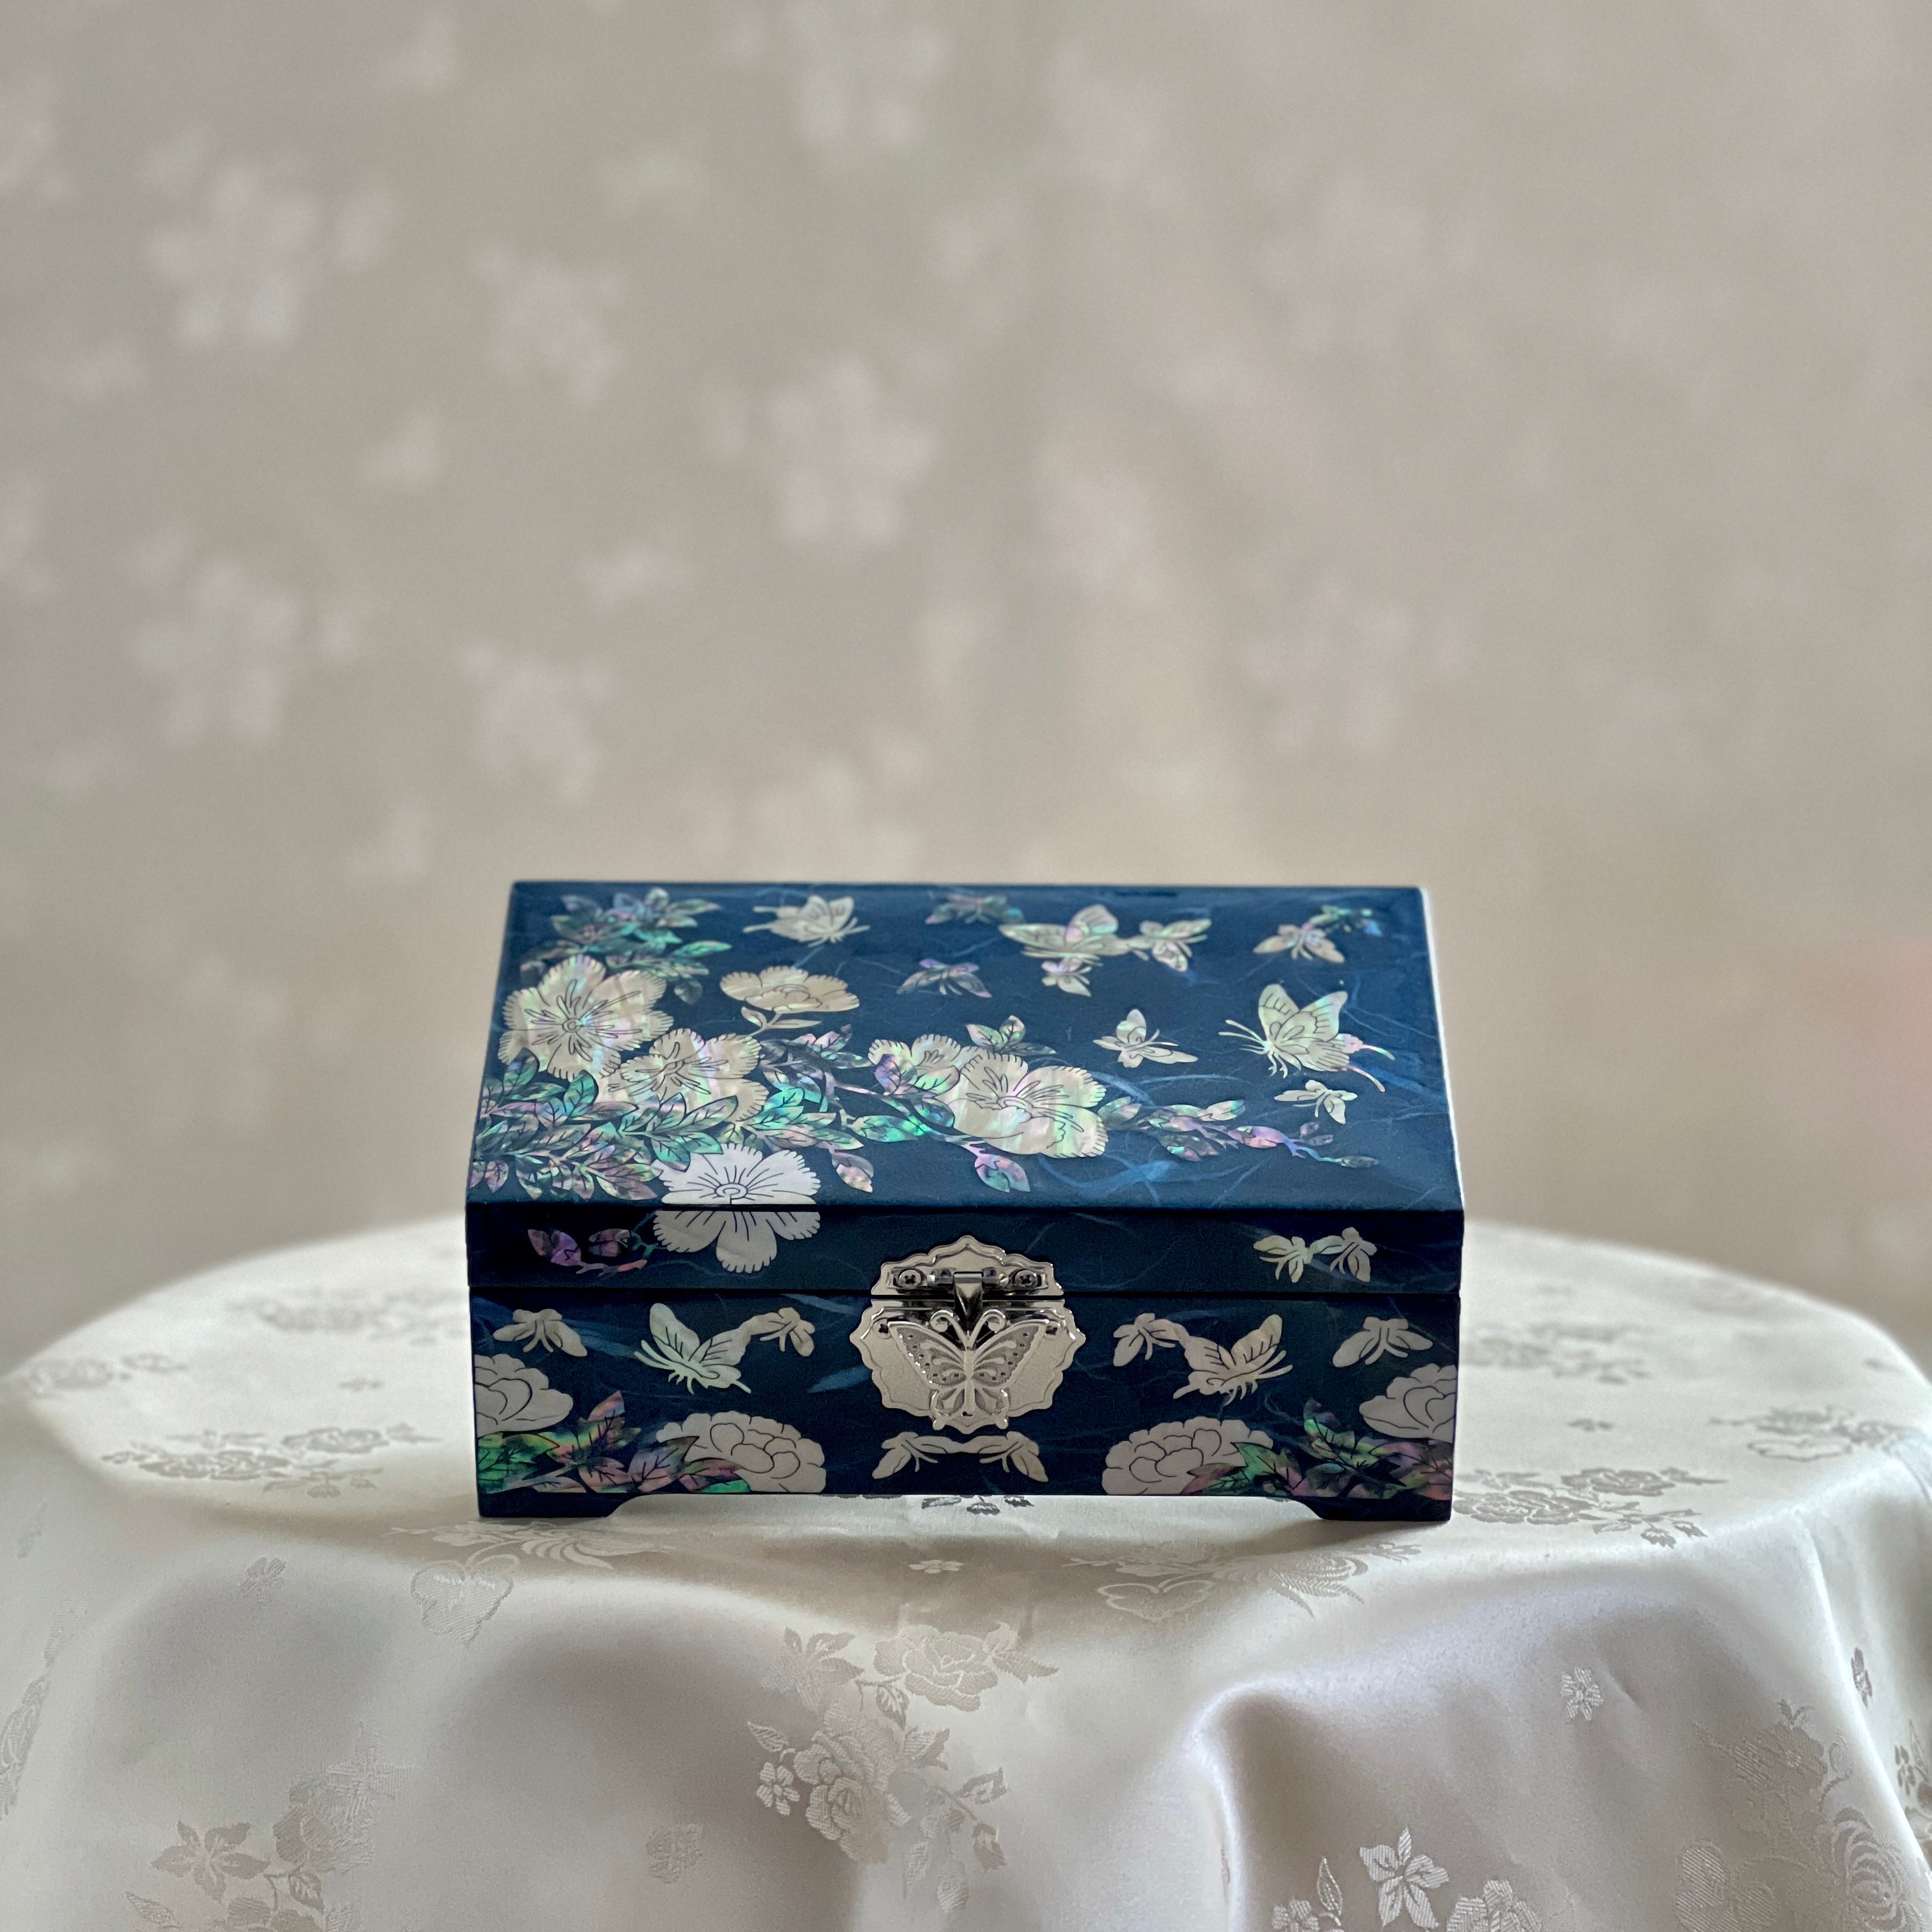 Upper view of Handmade Korean mother of pearl jewelry box with crane and pine pattern on navy paper-layered design, perfect for storing valuable jewelry.